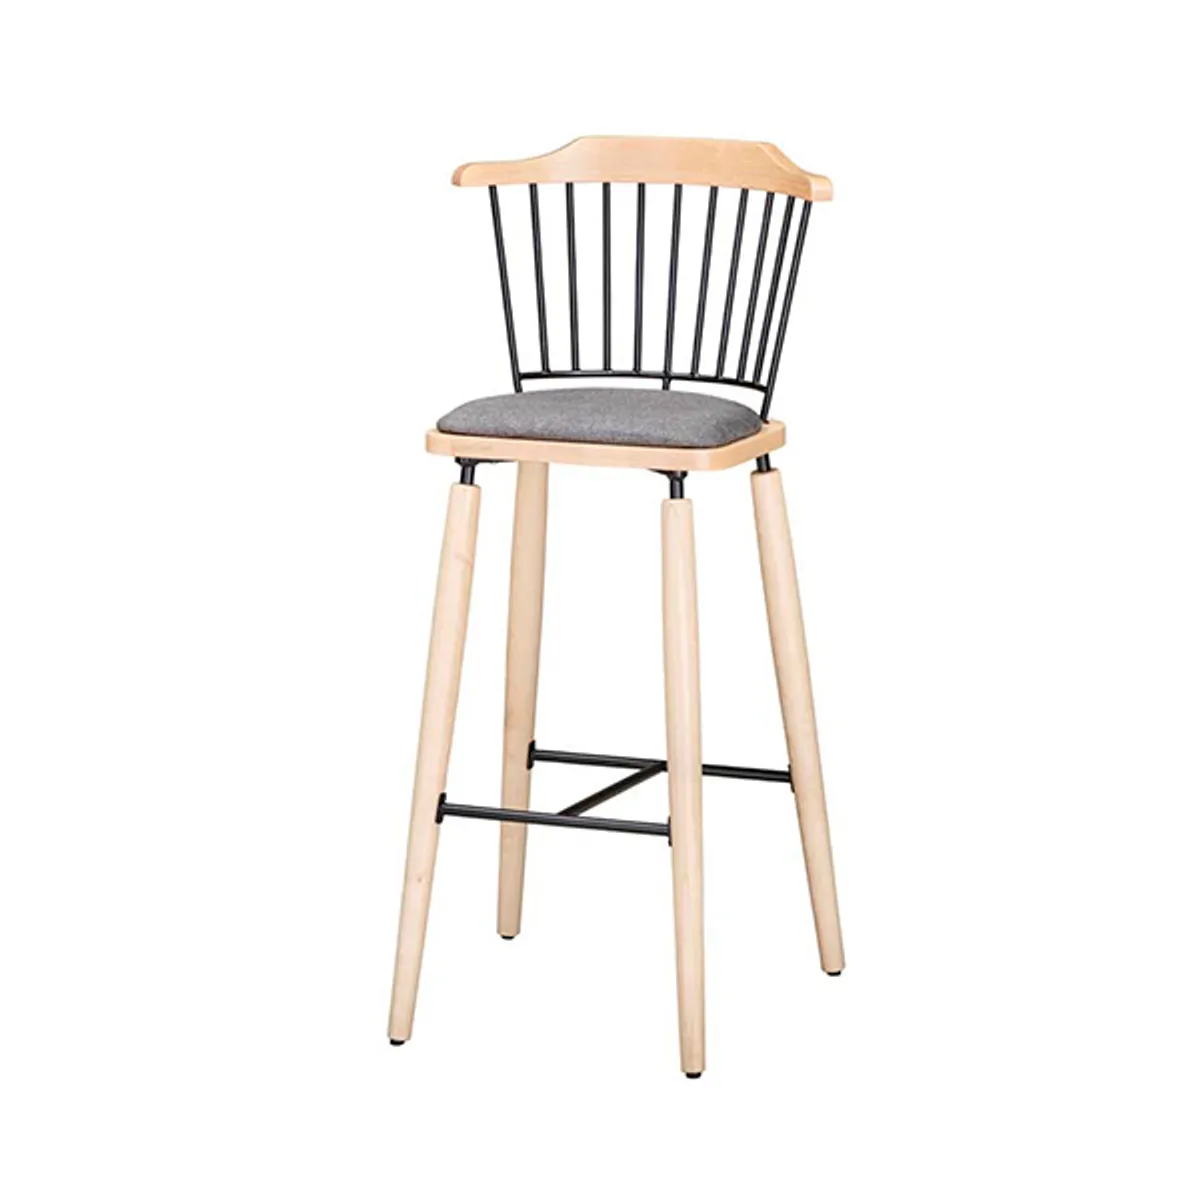 Combo Bar Stool 2 Uph Seat Inside Out Contracts